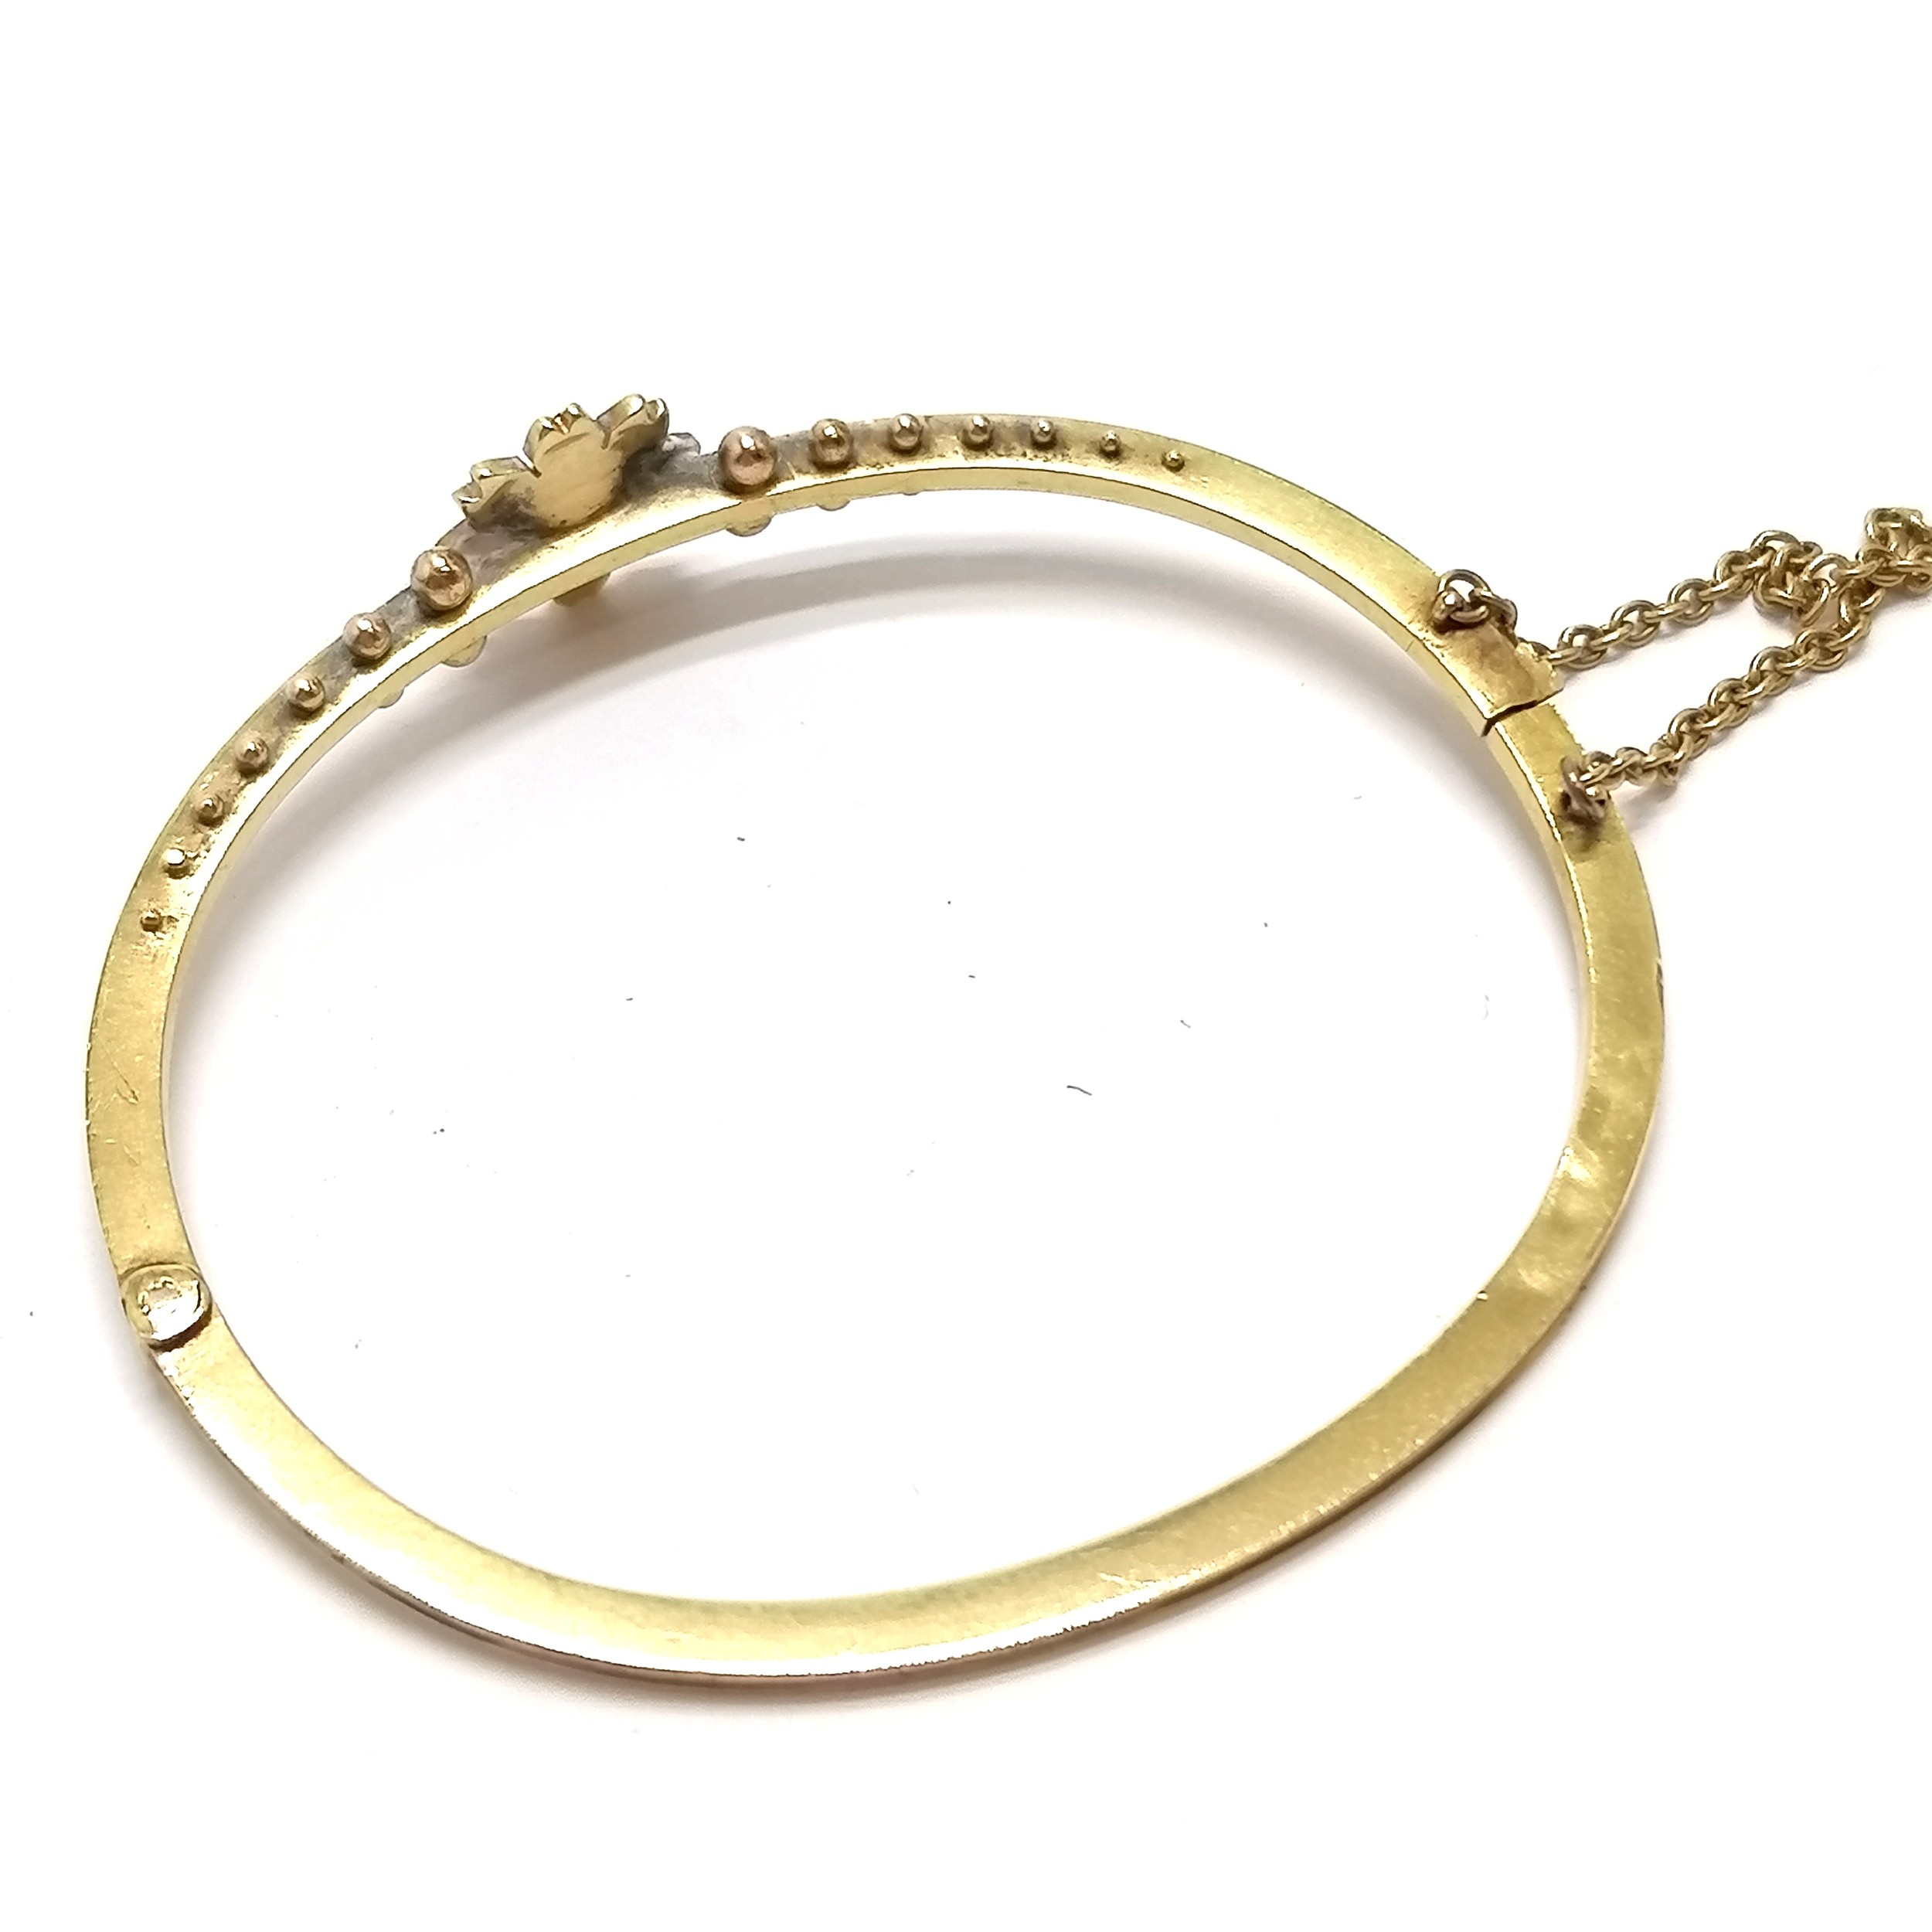 Antique unmarked gold (touch tests as 15ct) pearl set bangle - 5.5cm internal diameter across & - Image 2 of 4